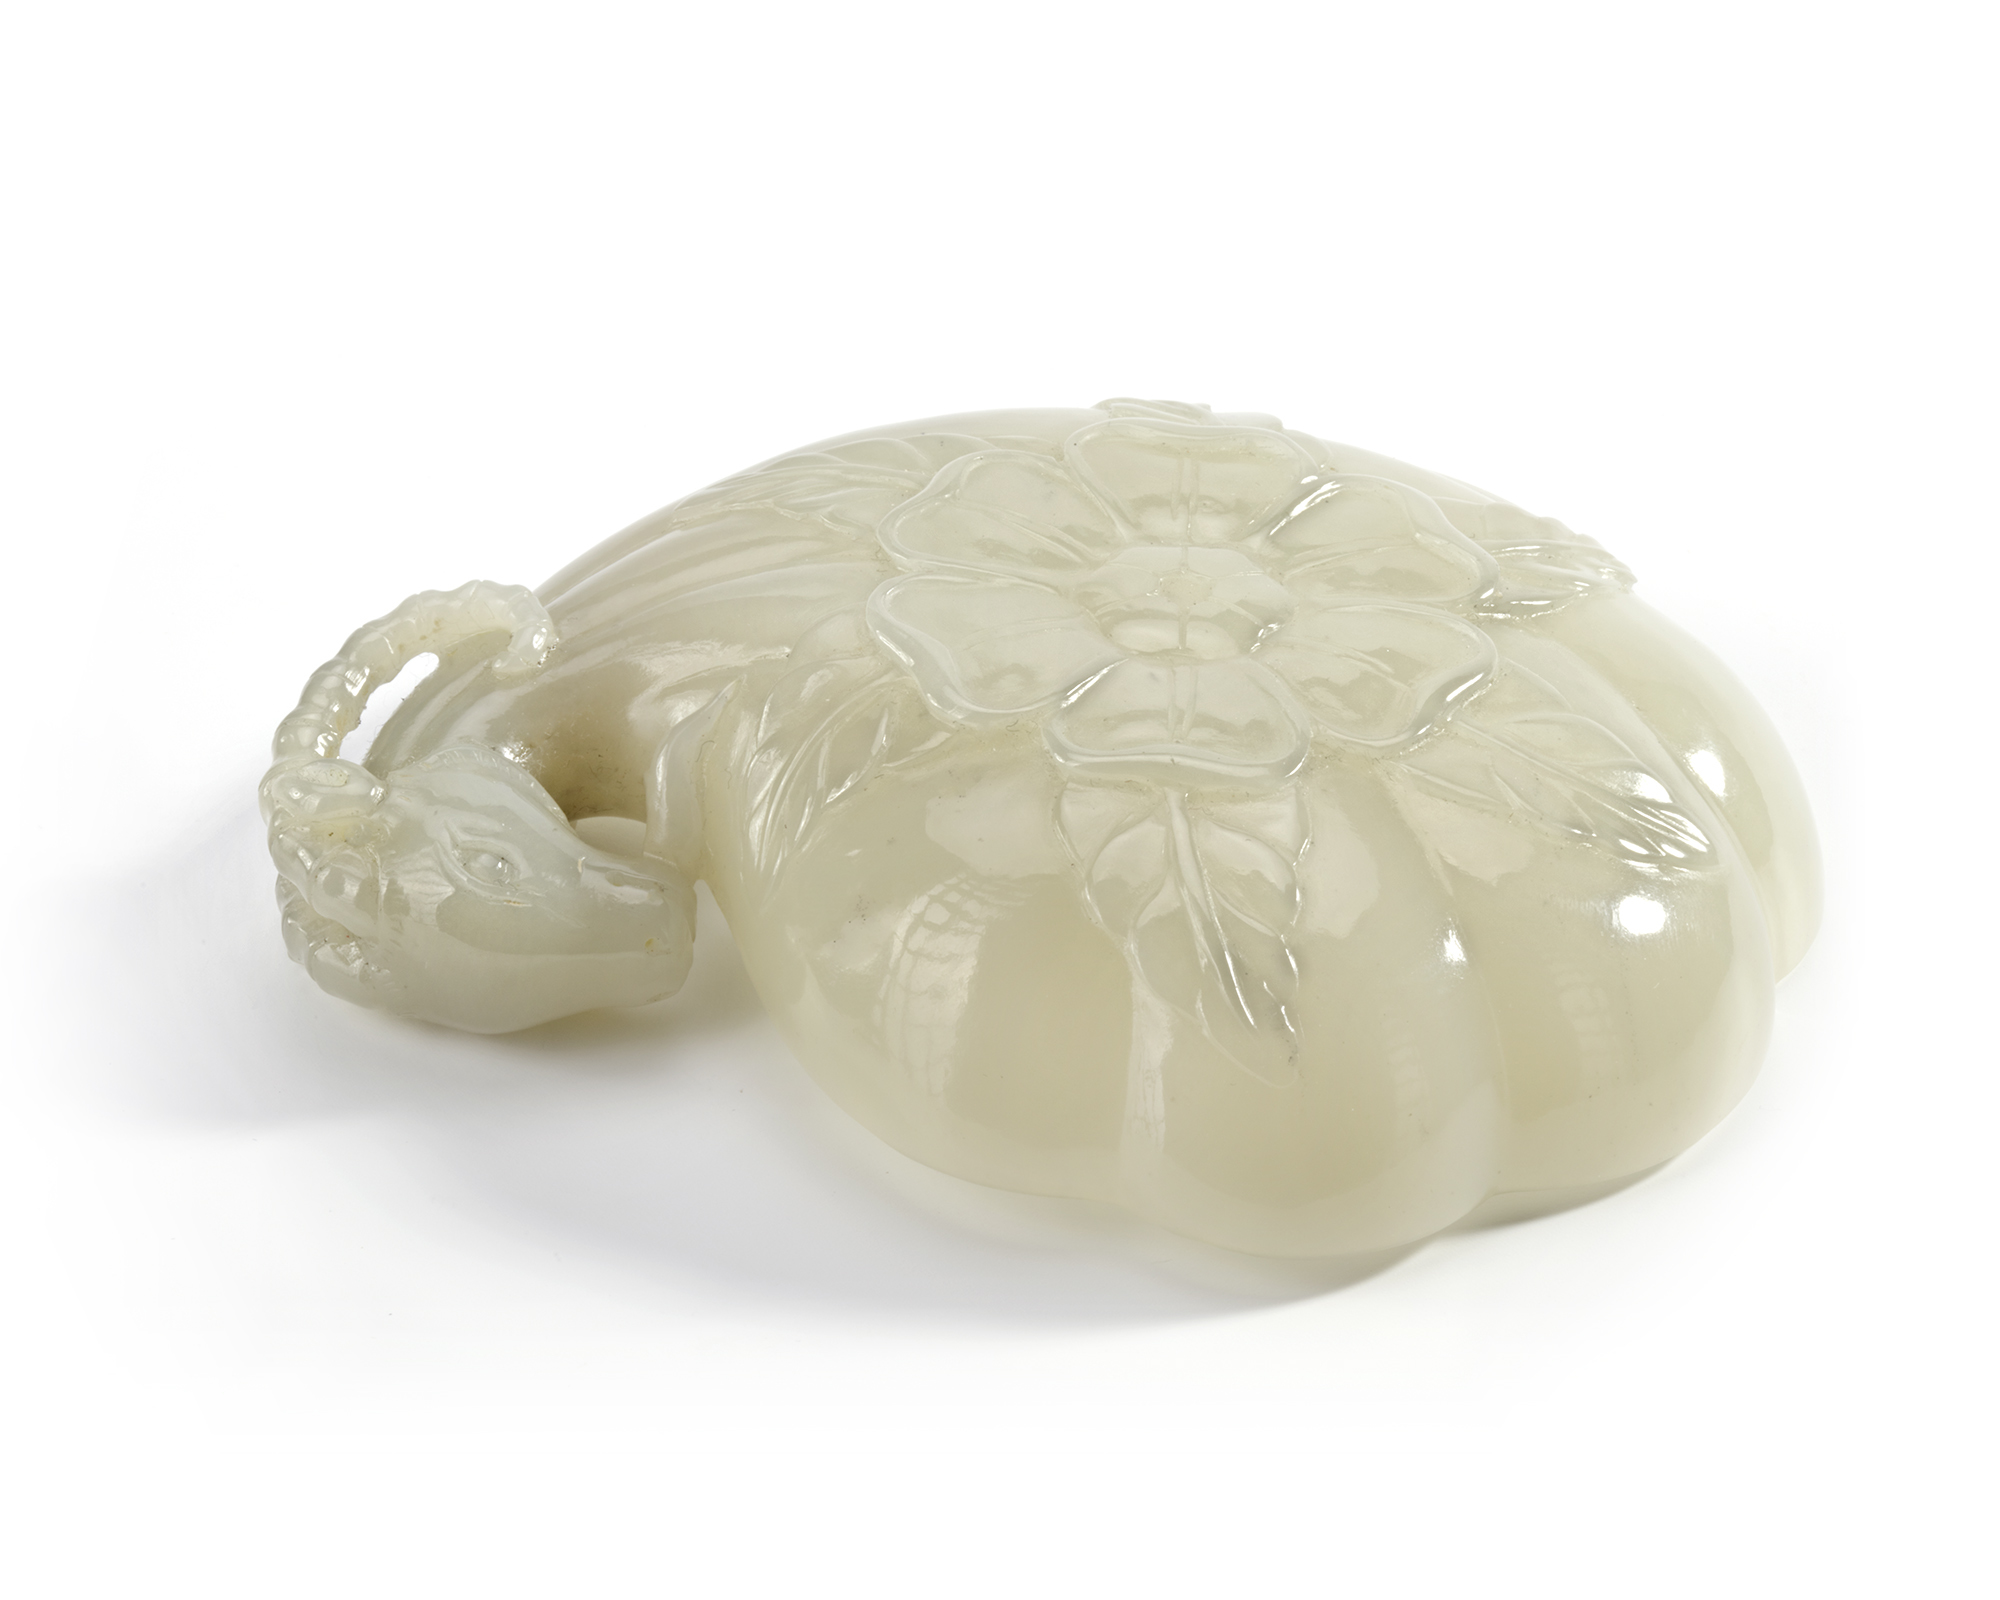 A MUGHAL-STYLE CARVED JADE RAMS CUP, 18TH CENTURY - Image 19 of 20